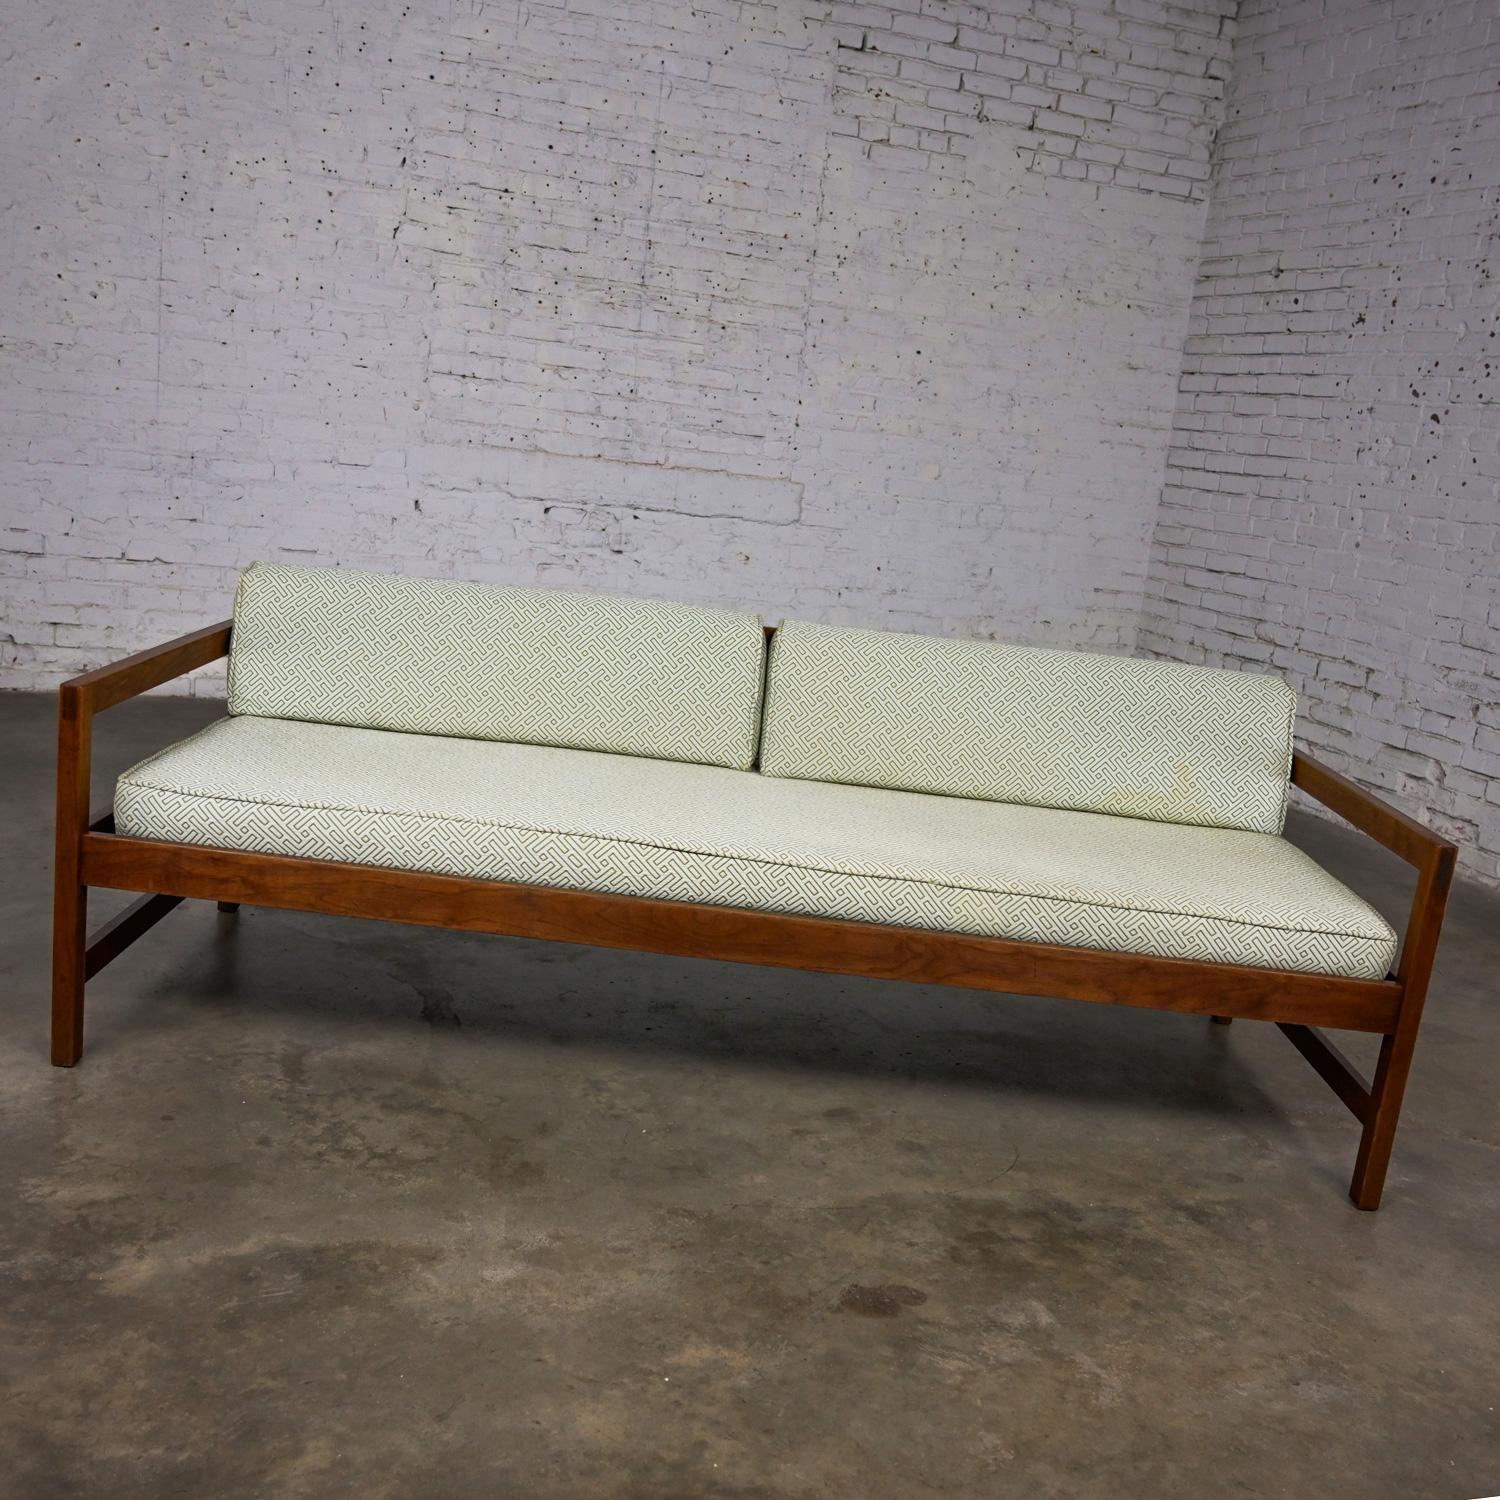 Incredible Mid-20th Century MCM (Mid Century Modern) daybed sofa with a square walnut frame & poly wrapped foam seat and back cushions in a zippered gray blue/green and brown upholstery fabric & Stram Sweden springs. Beautiful condition, keeping in